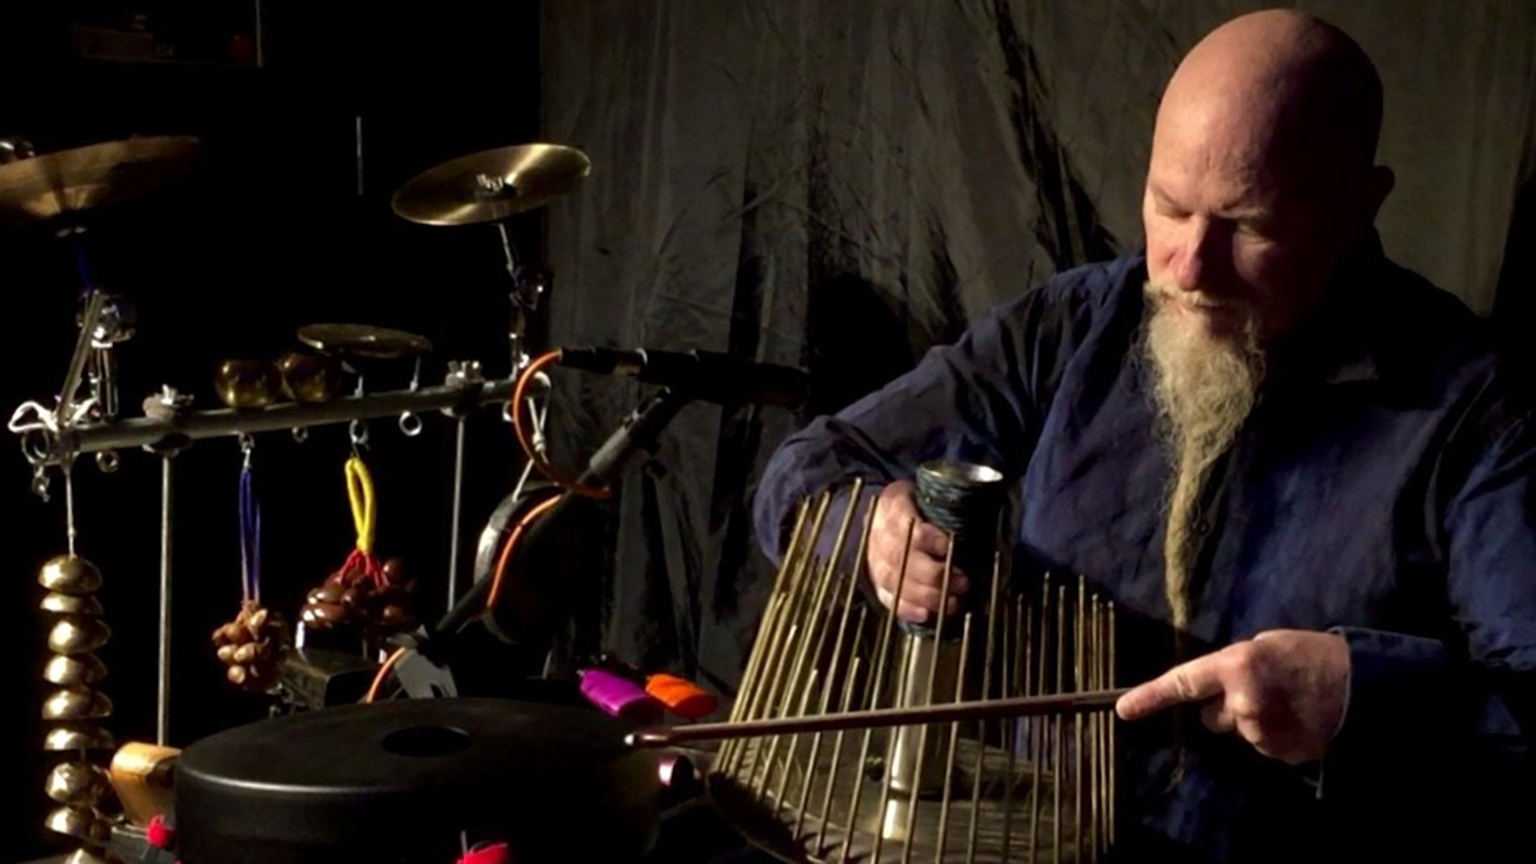 Klimchak playing a created instrument made of rods and other fabricated materials.